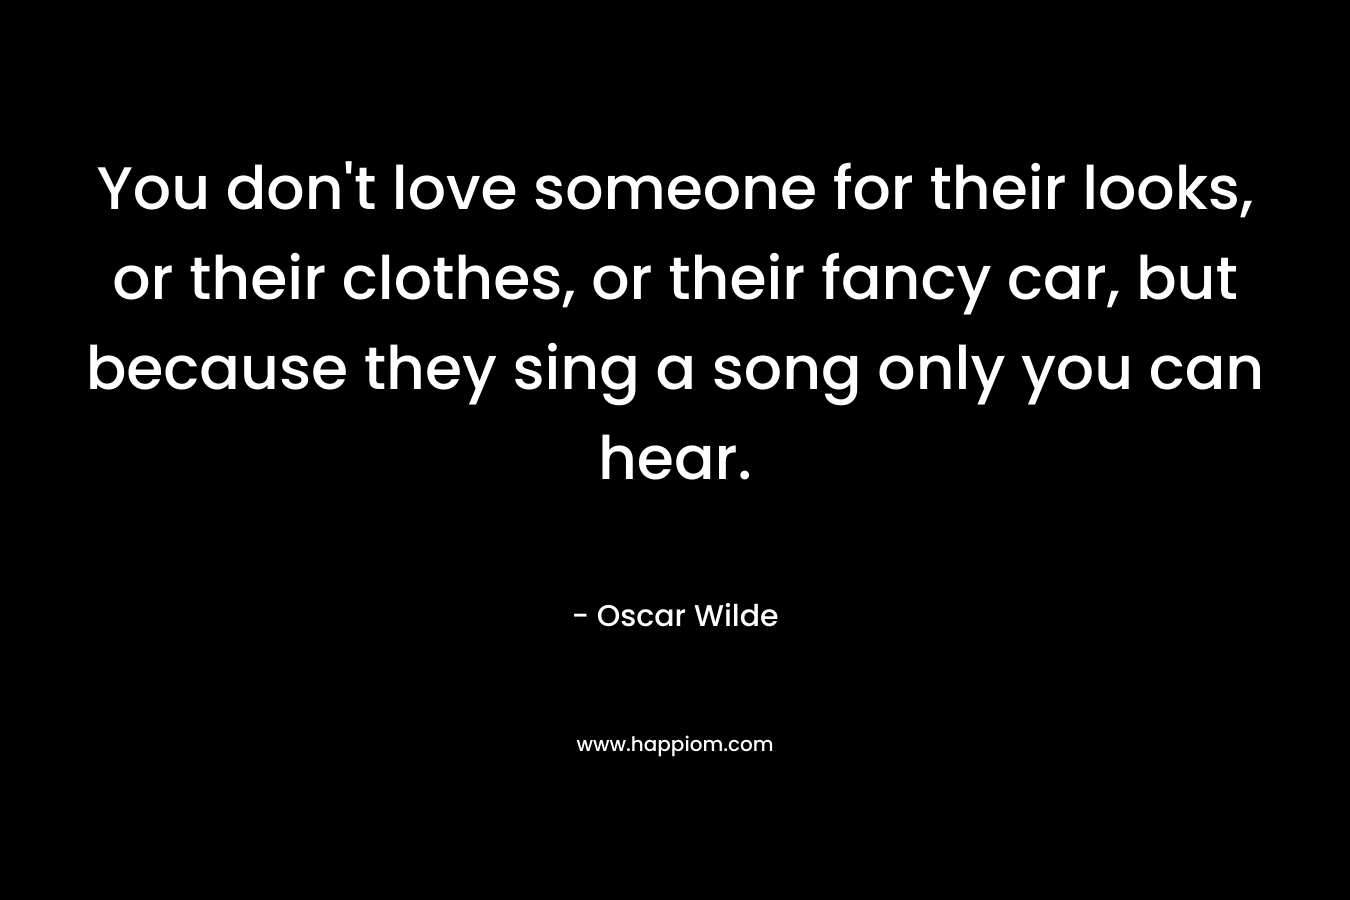 You don’t love someone for their looks, or their clothes, or their fancy car, but because they sing a song only you can hear. – Oscar Wilde